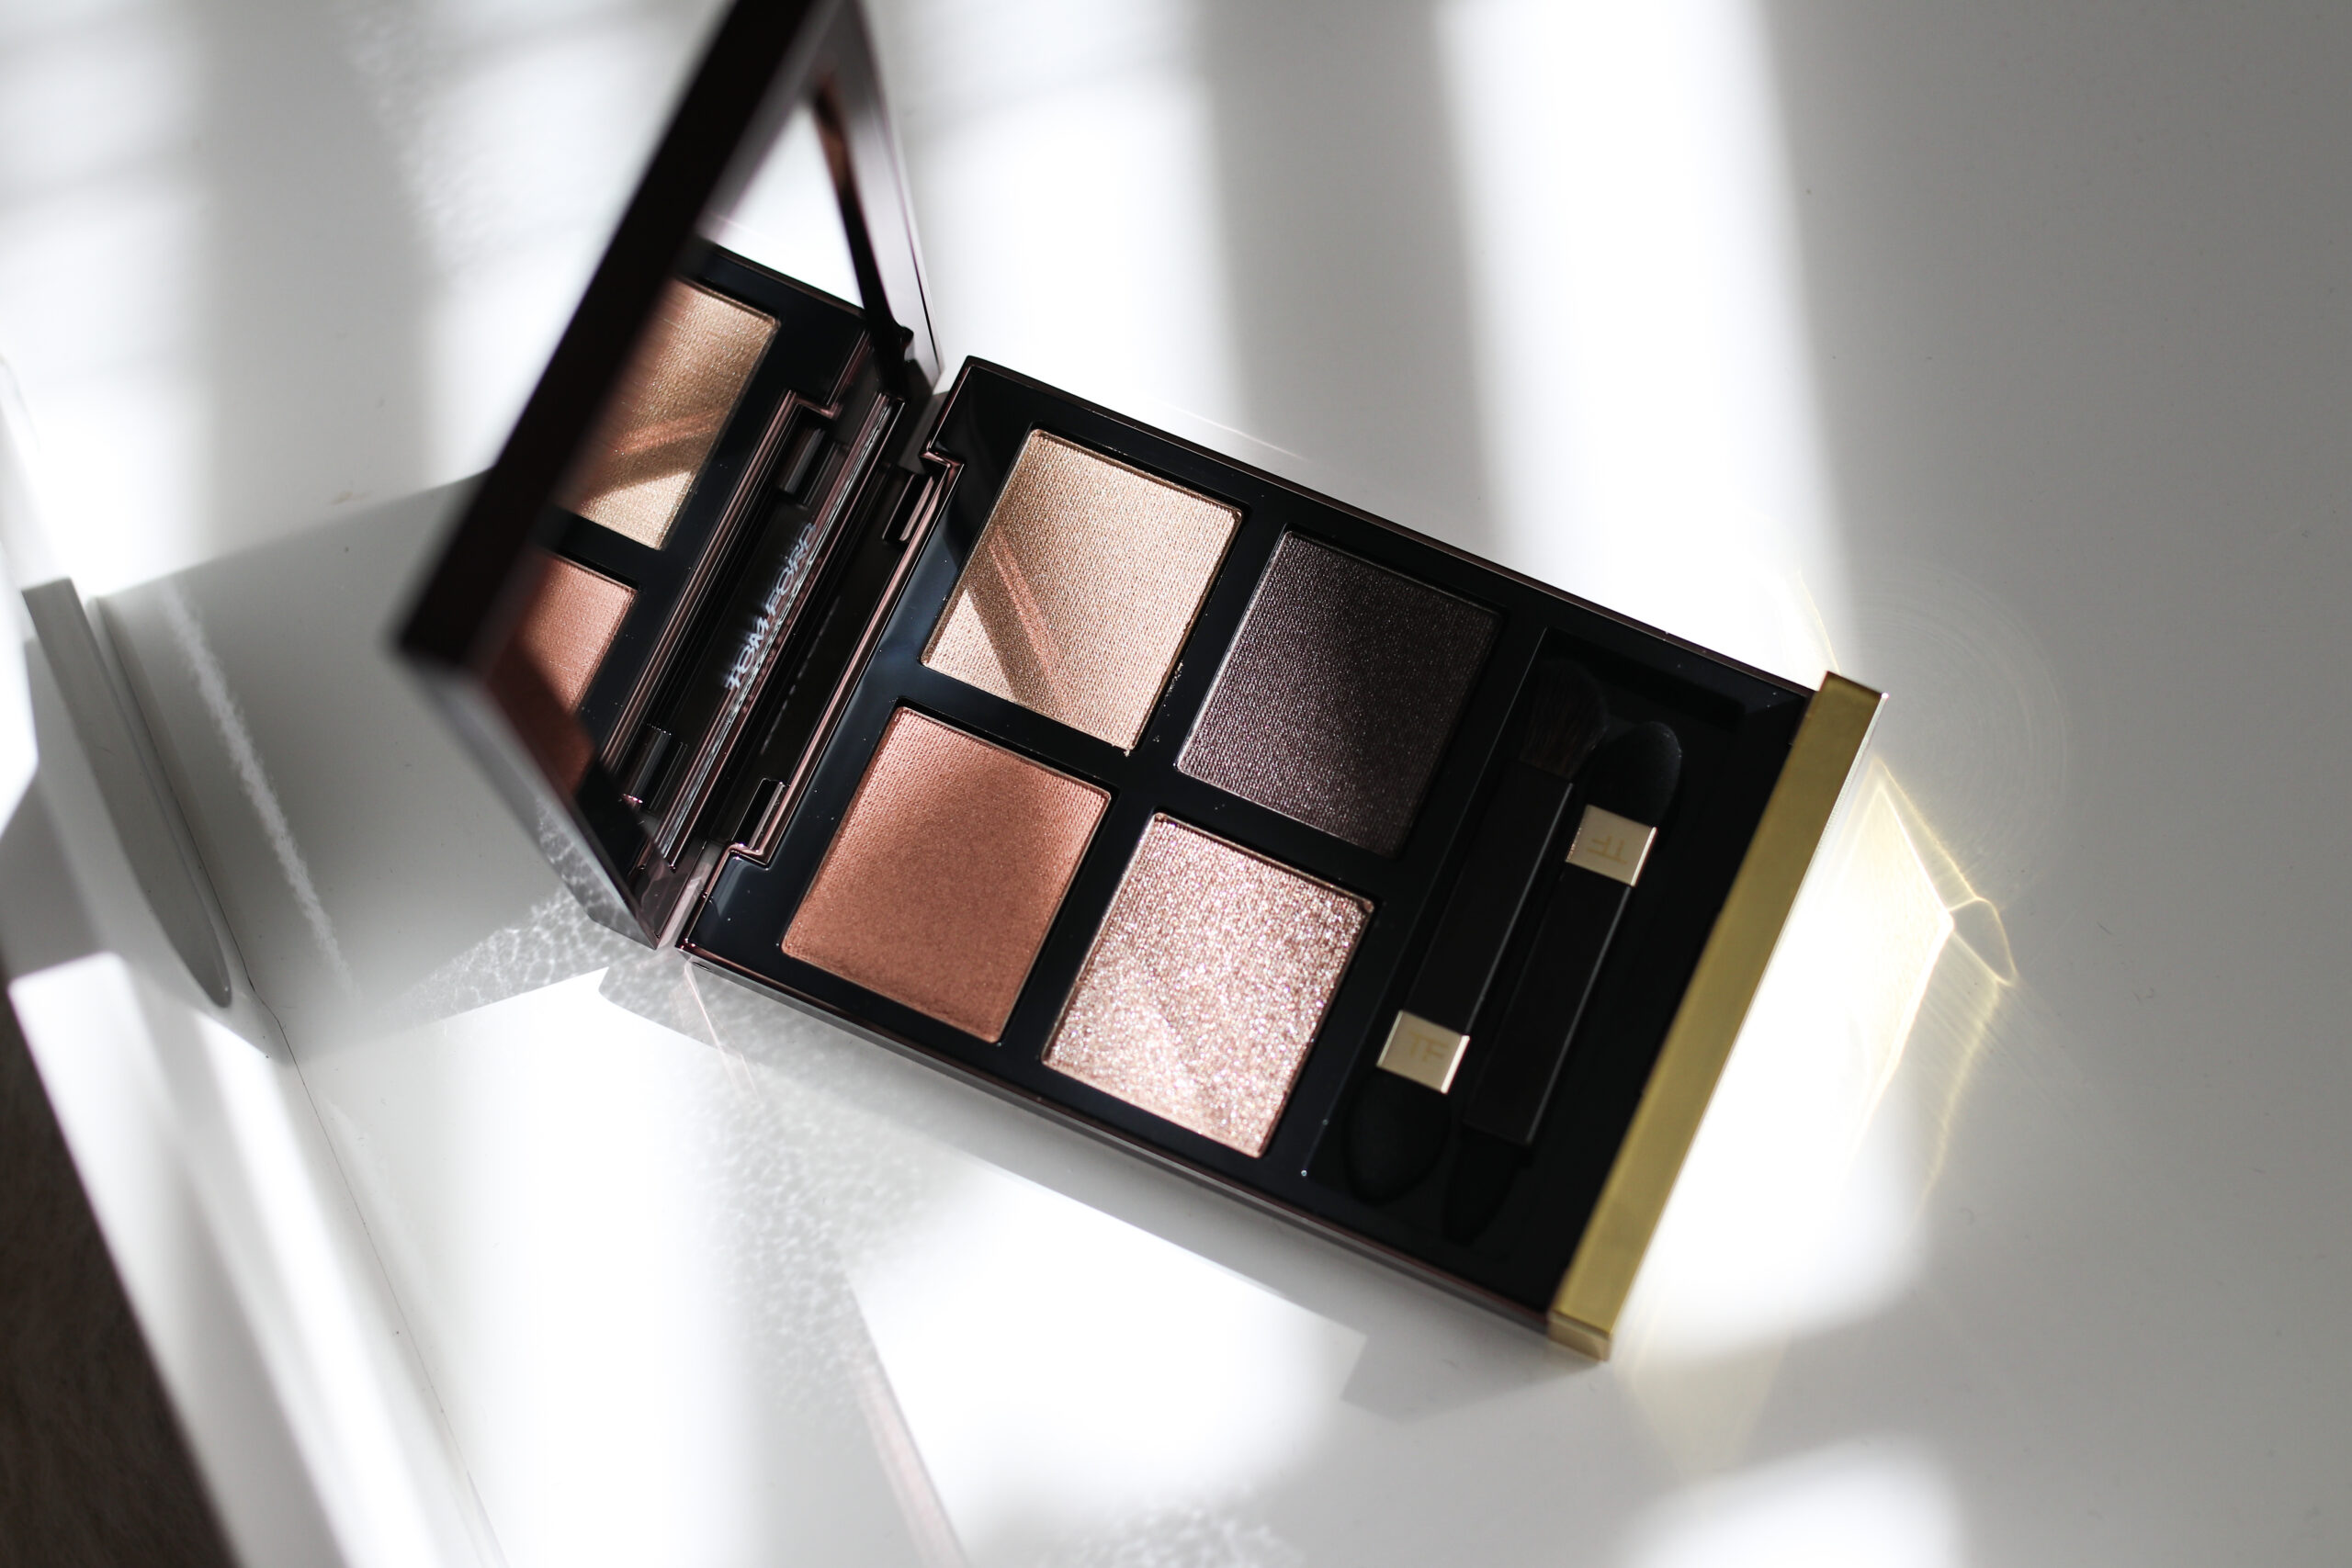 Review + Swatches: Tom Ford Creme Eye Quad in Rose Topaz | alittlebitetc